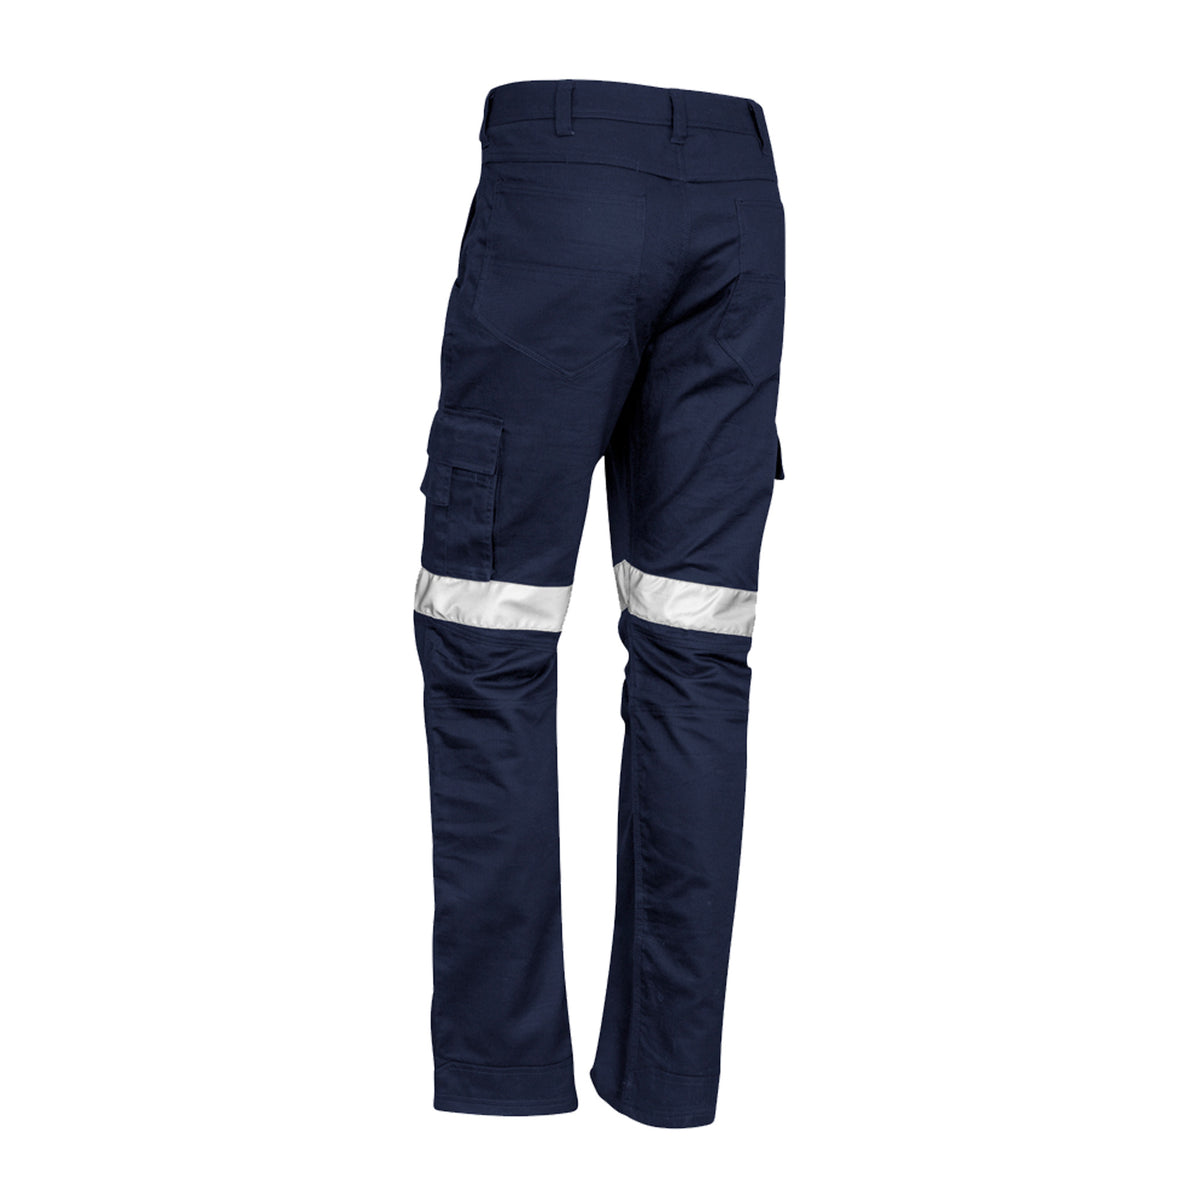 back view of navy rugged cooling tape pant